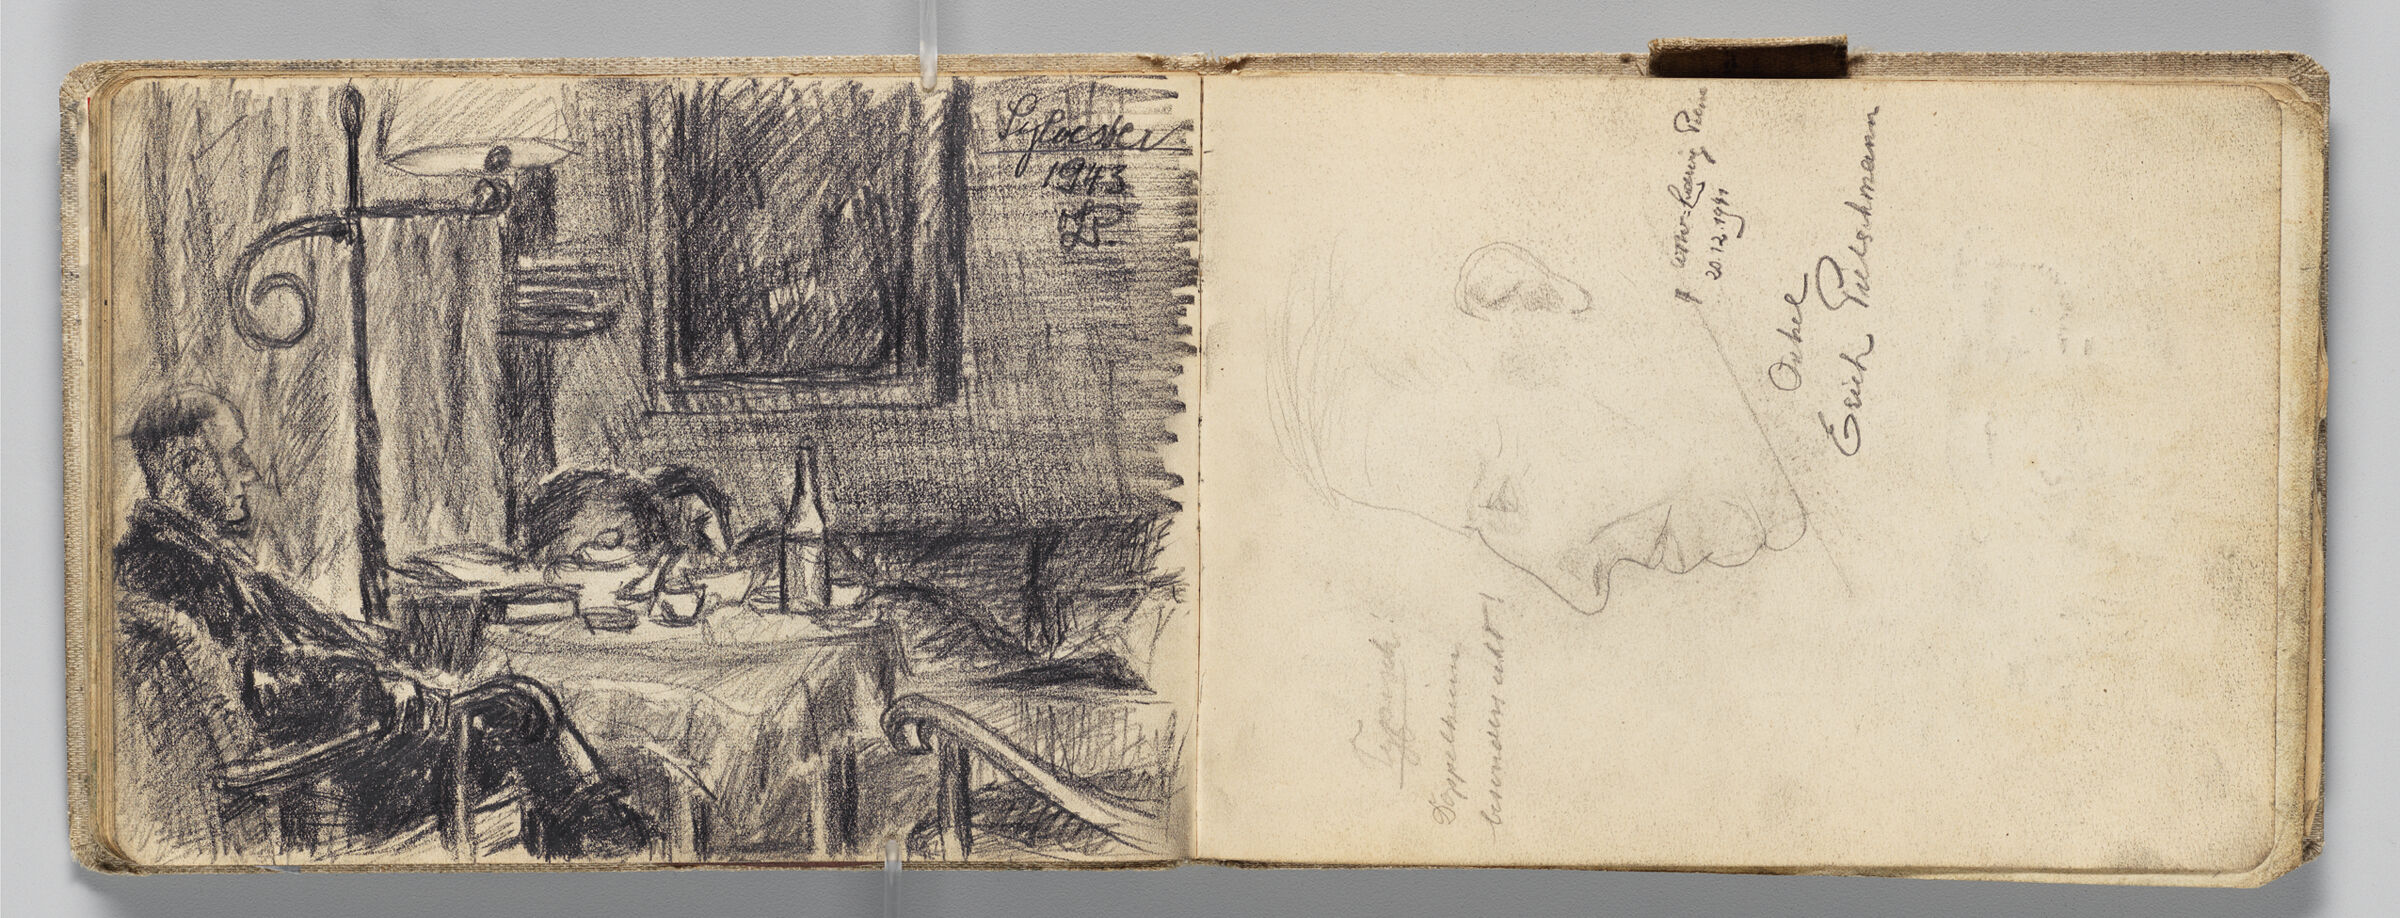 Untitled (Man In Domestic Interior, Left Page); Untitled (Profile Portrait Of Artist's Uncle [Erich Pietschmann], Right Page)